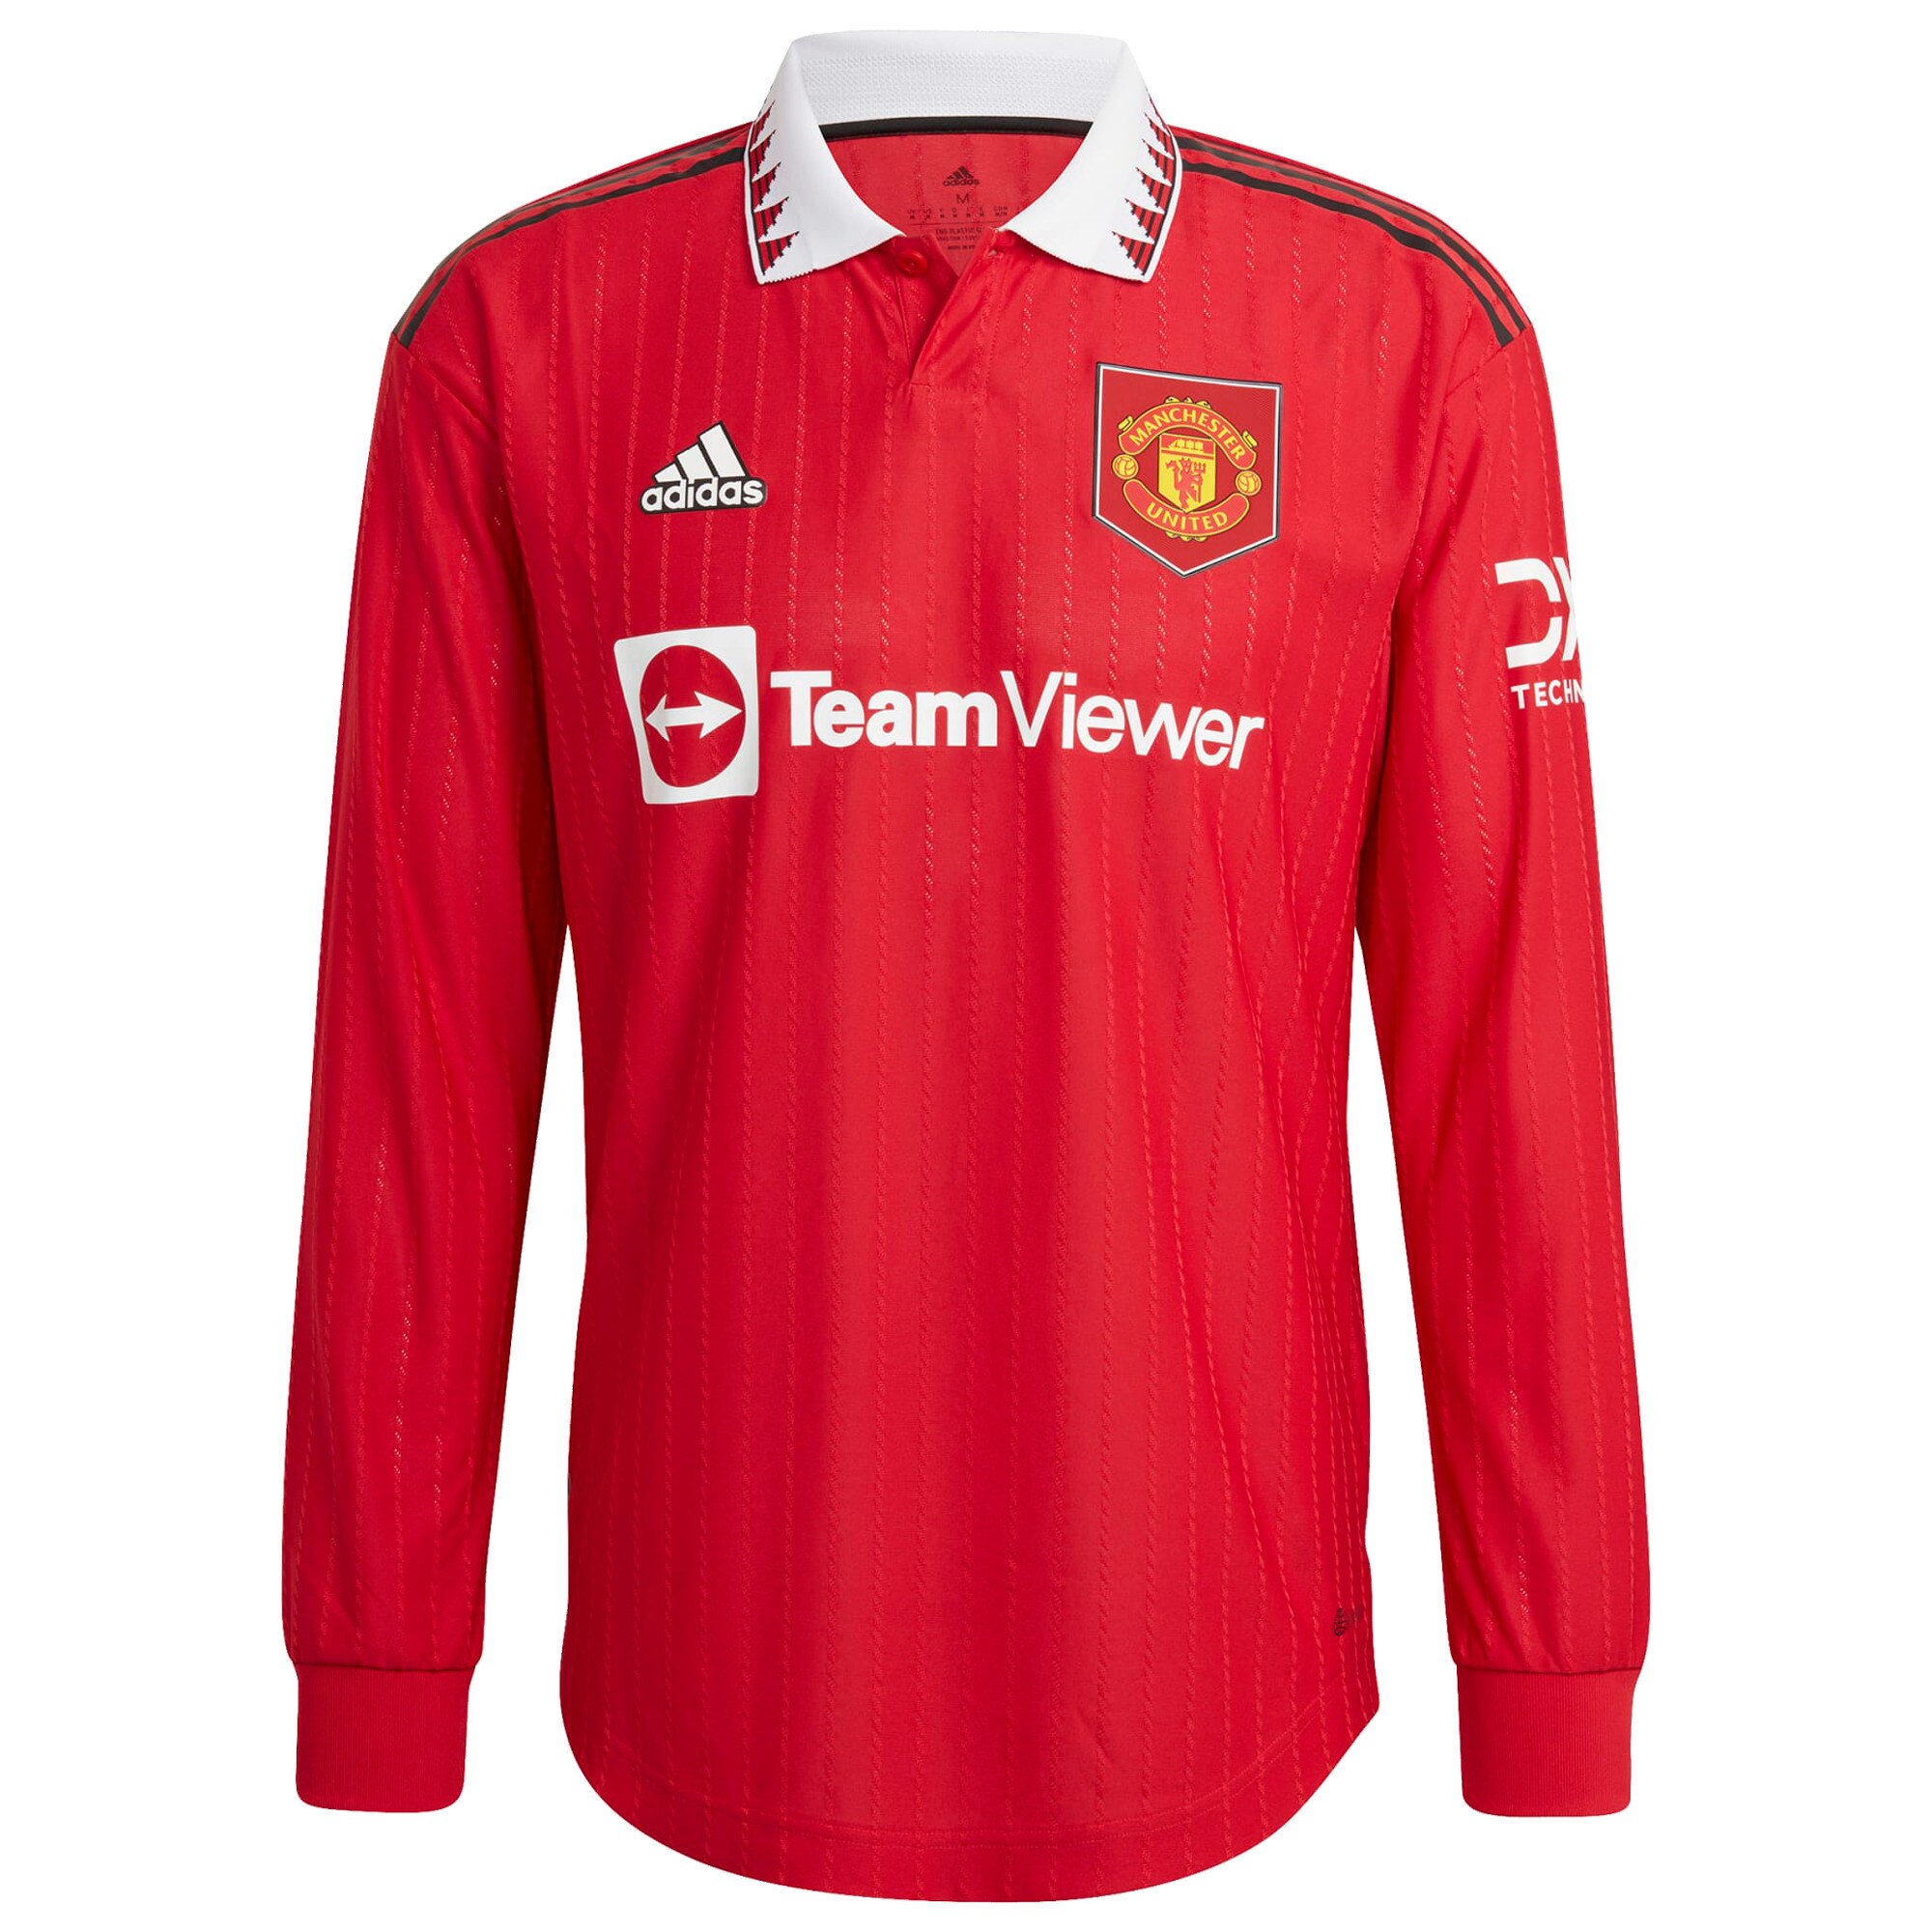 Manchester United Cup Home Authentic Shirt 2022-23 - Long Sleeve with Ladd 12 printing